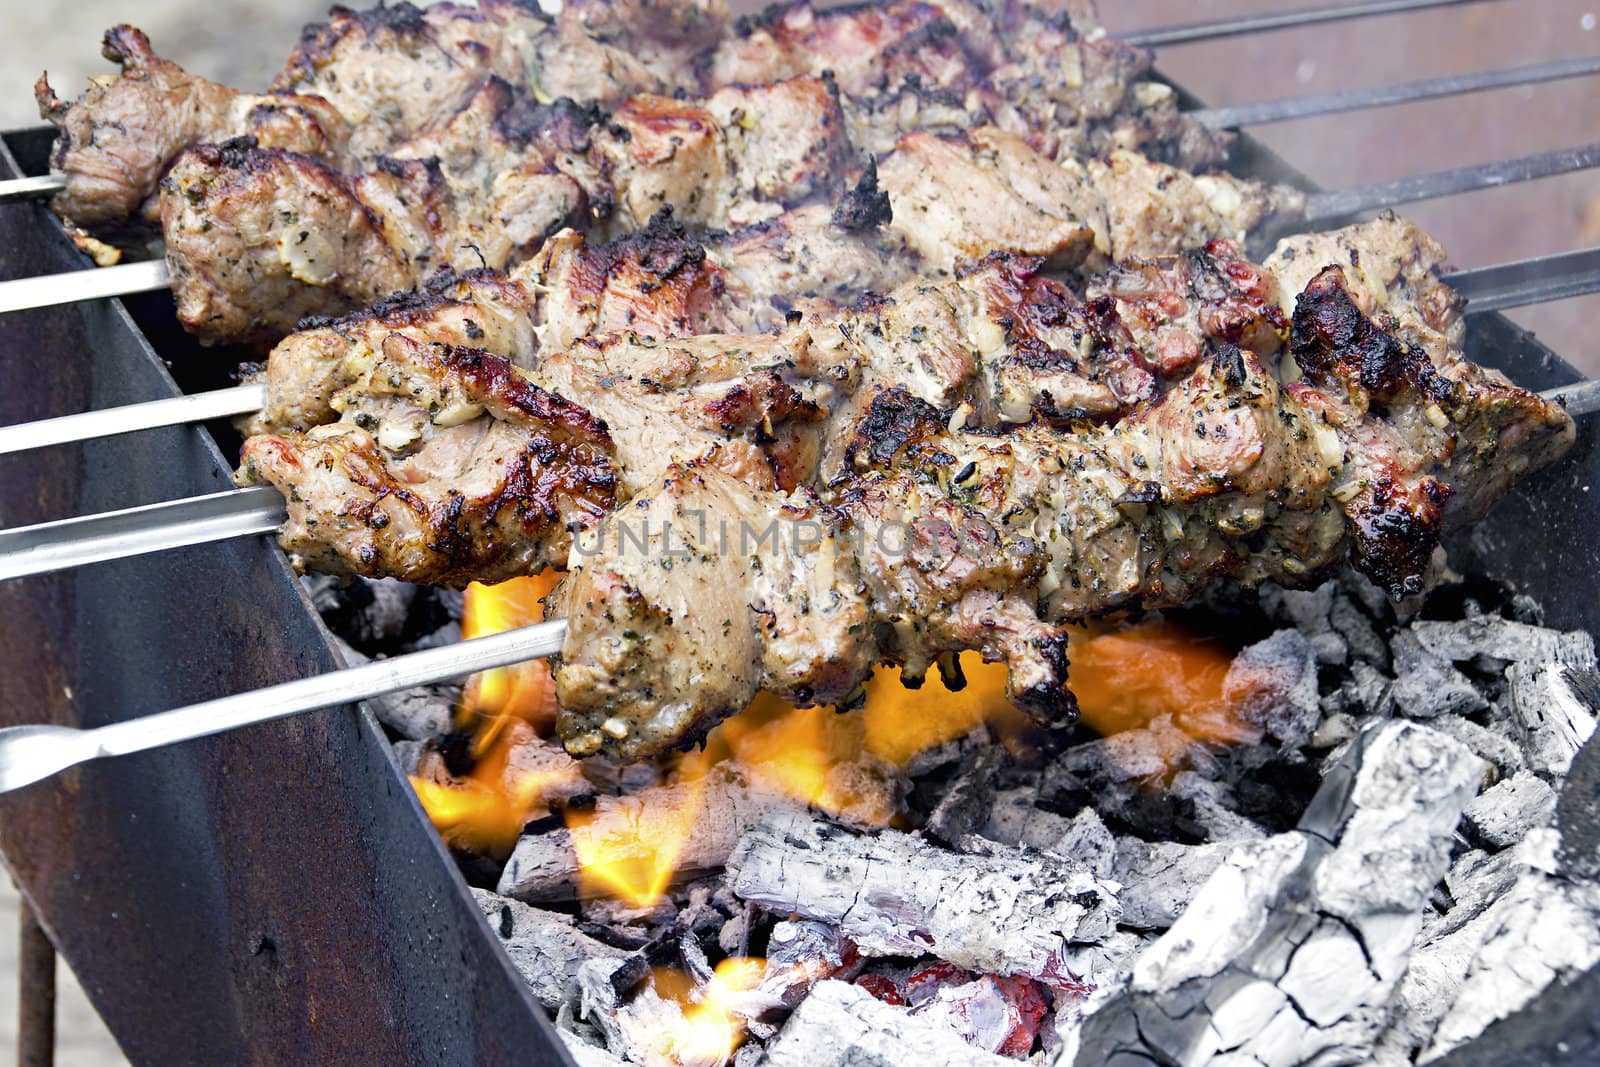 image pieces of meat roasted on a spit over charcoal